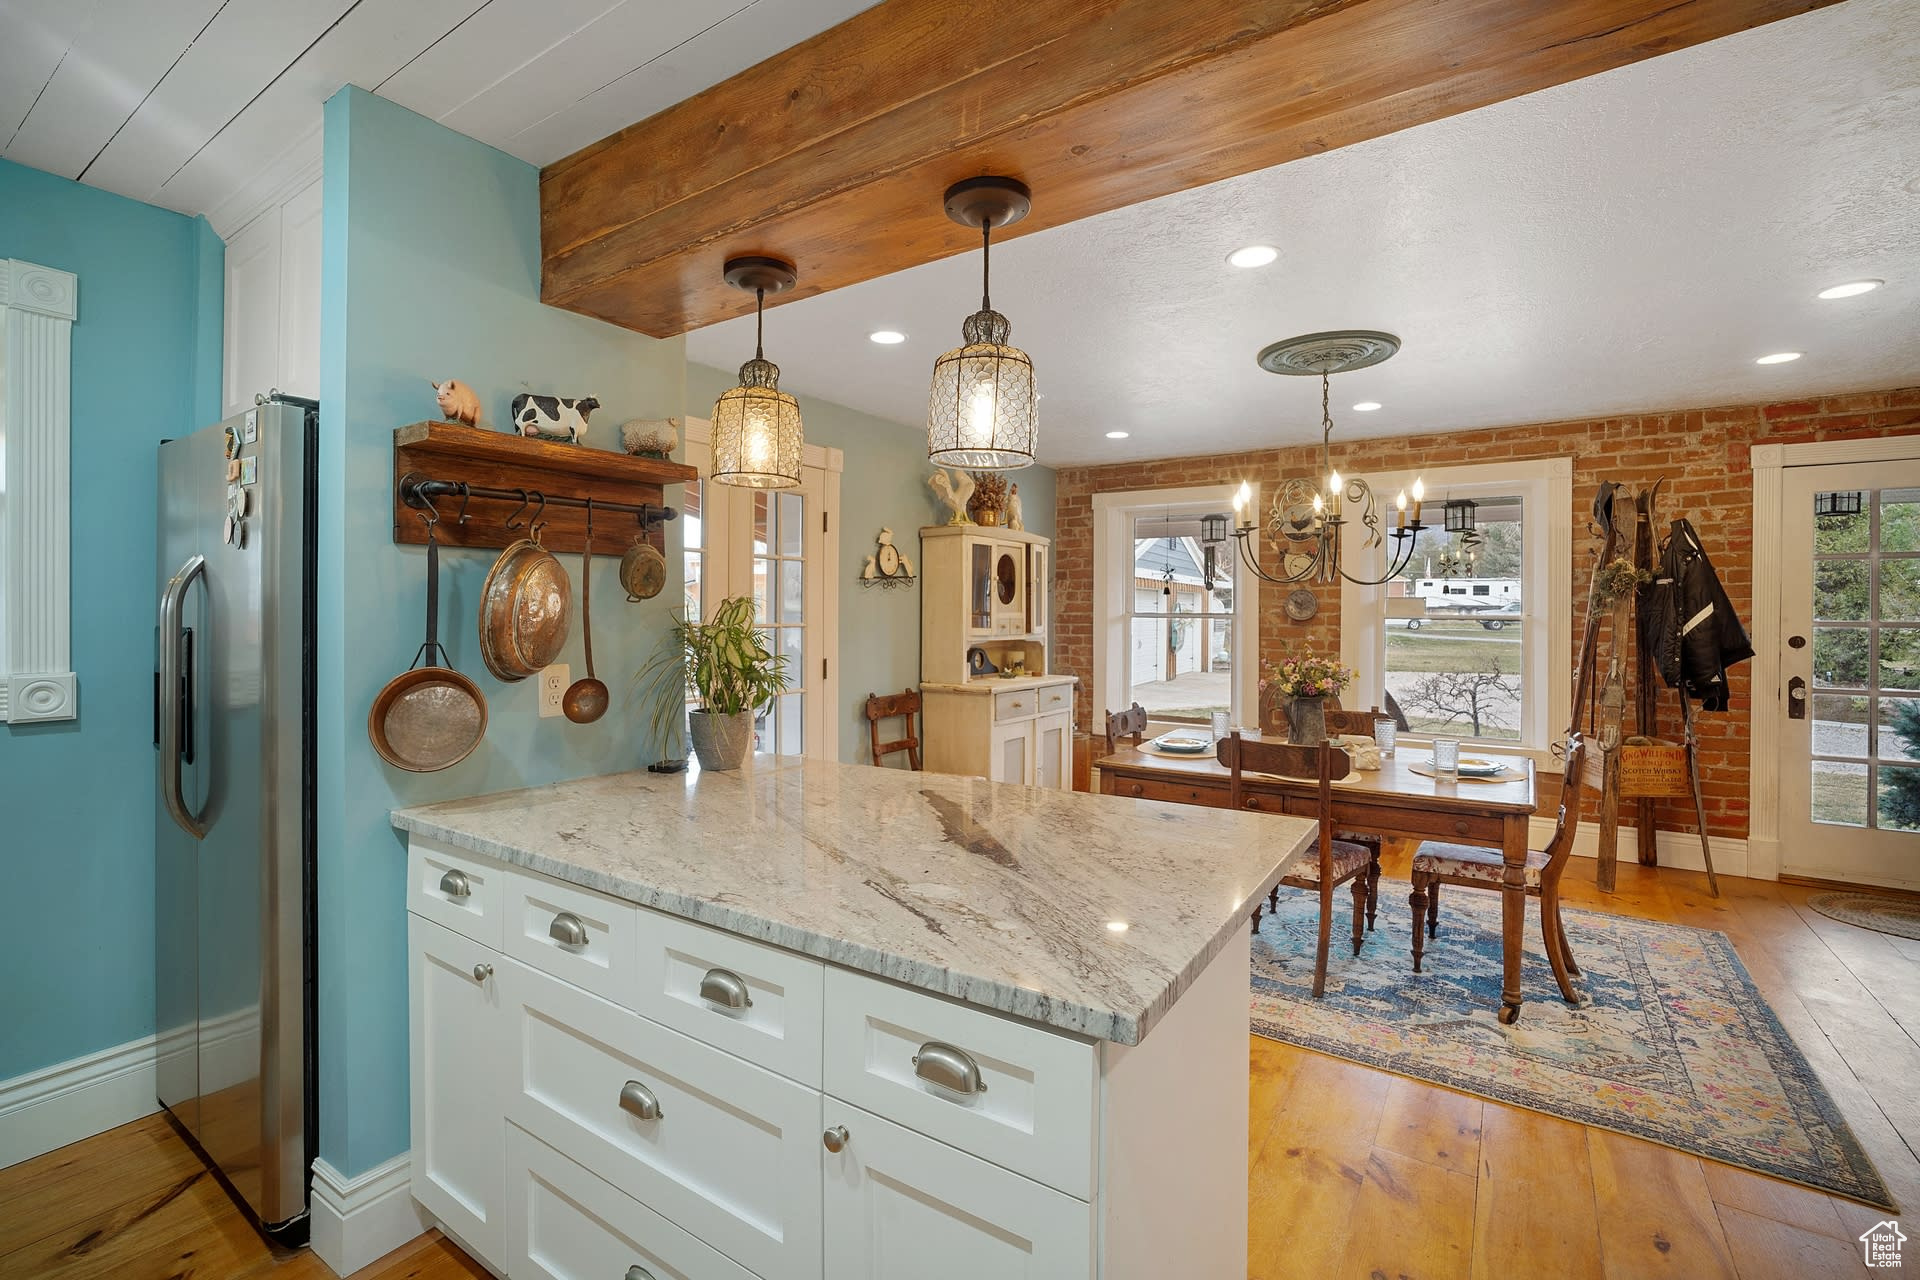 Kitchen featuring brick wall, high quality fridge, white cabinets, decorative light fixtures, and an inviting chandelier